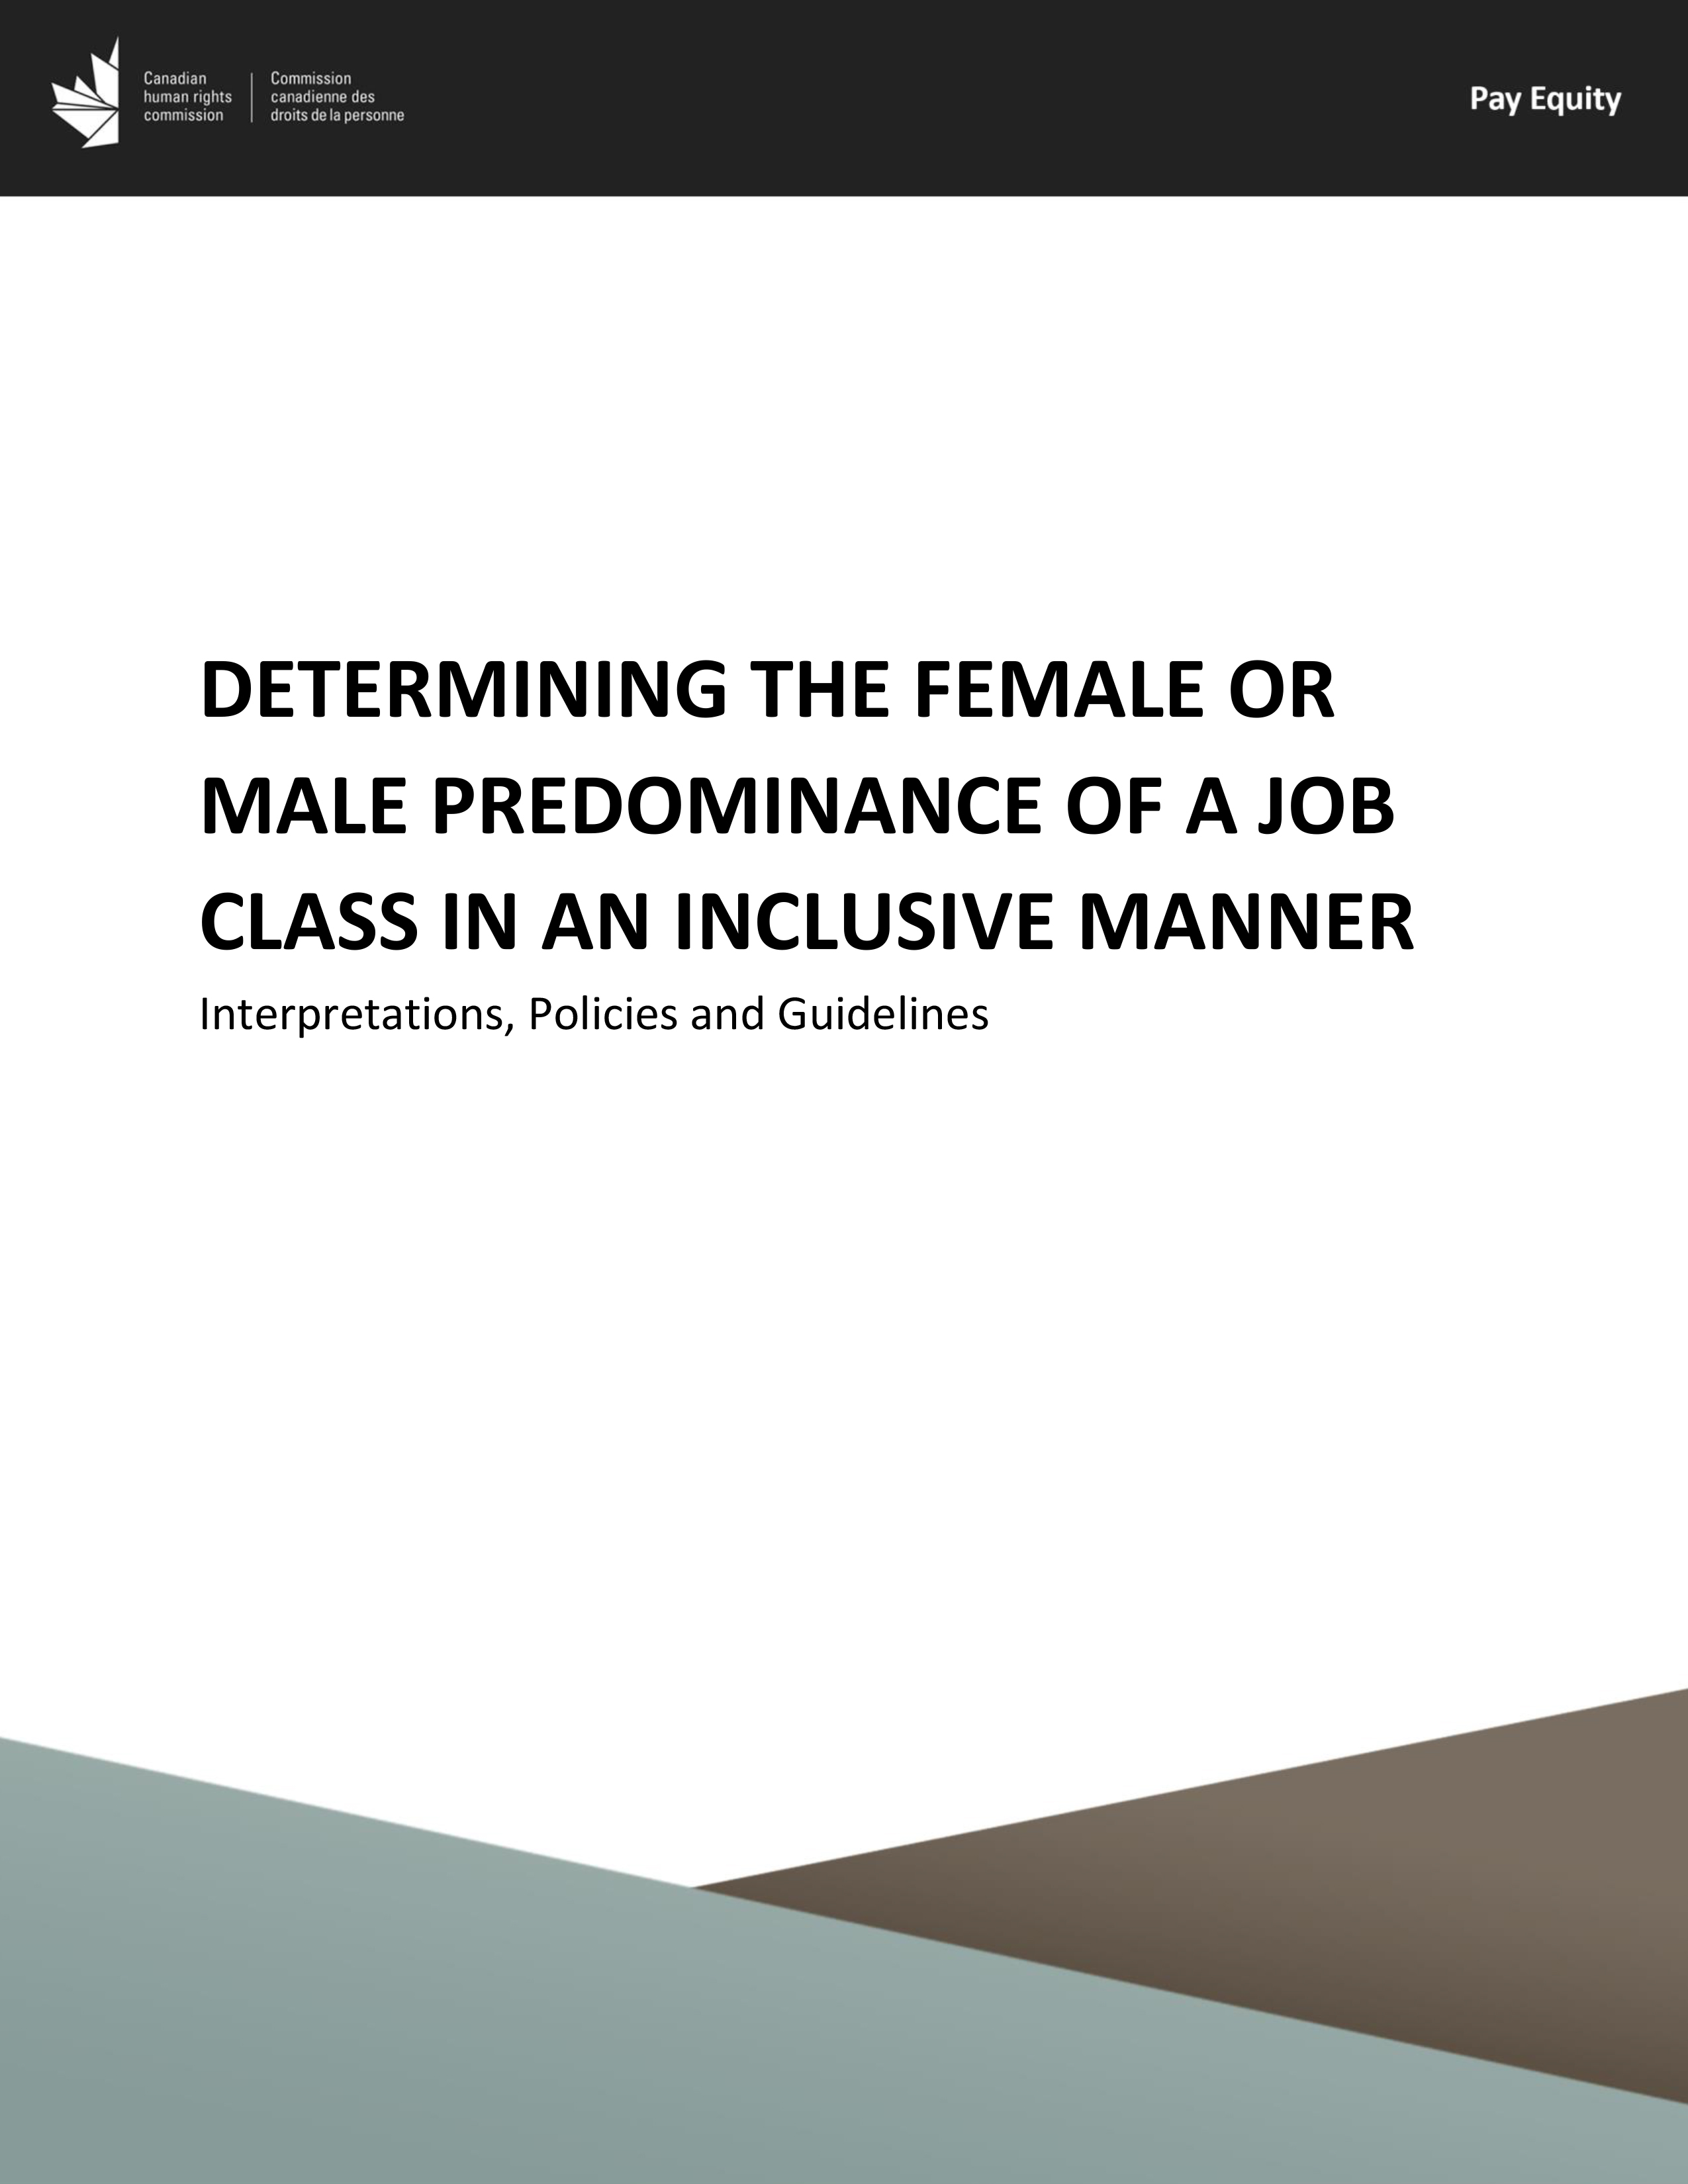 Determining the female or male predominance of a job class in an inclusive manner - Interpretations, Policies and Guidelines - Thumbnail